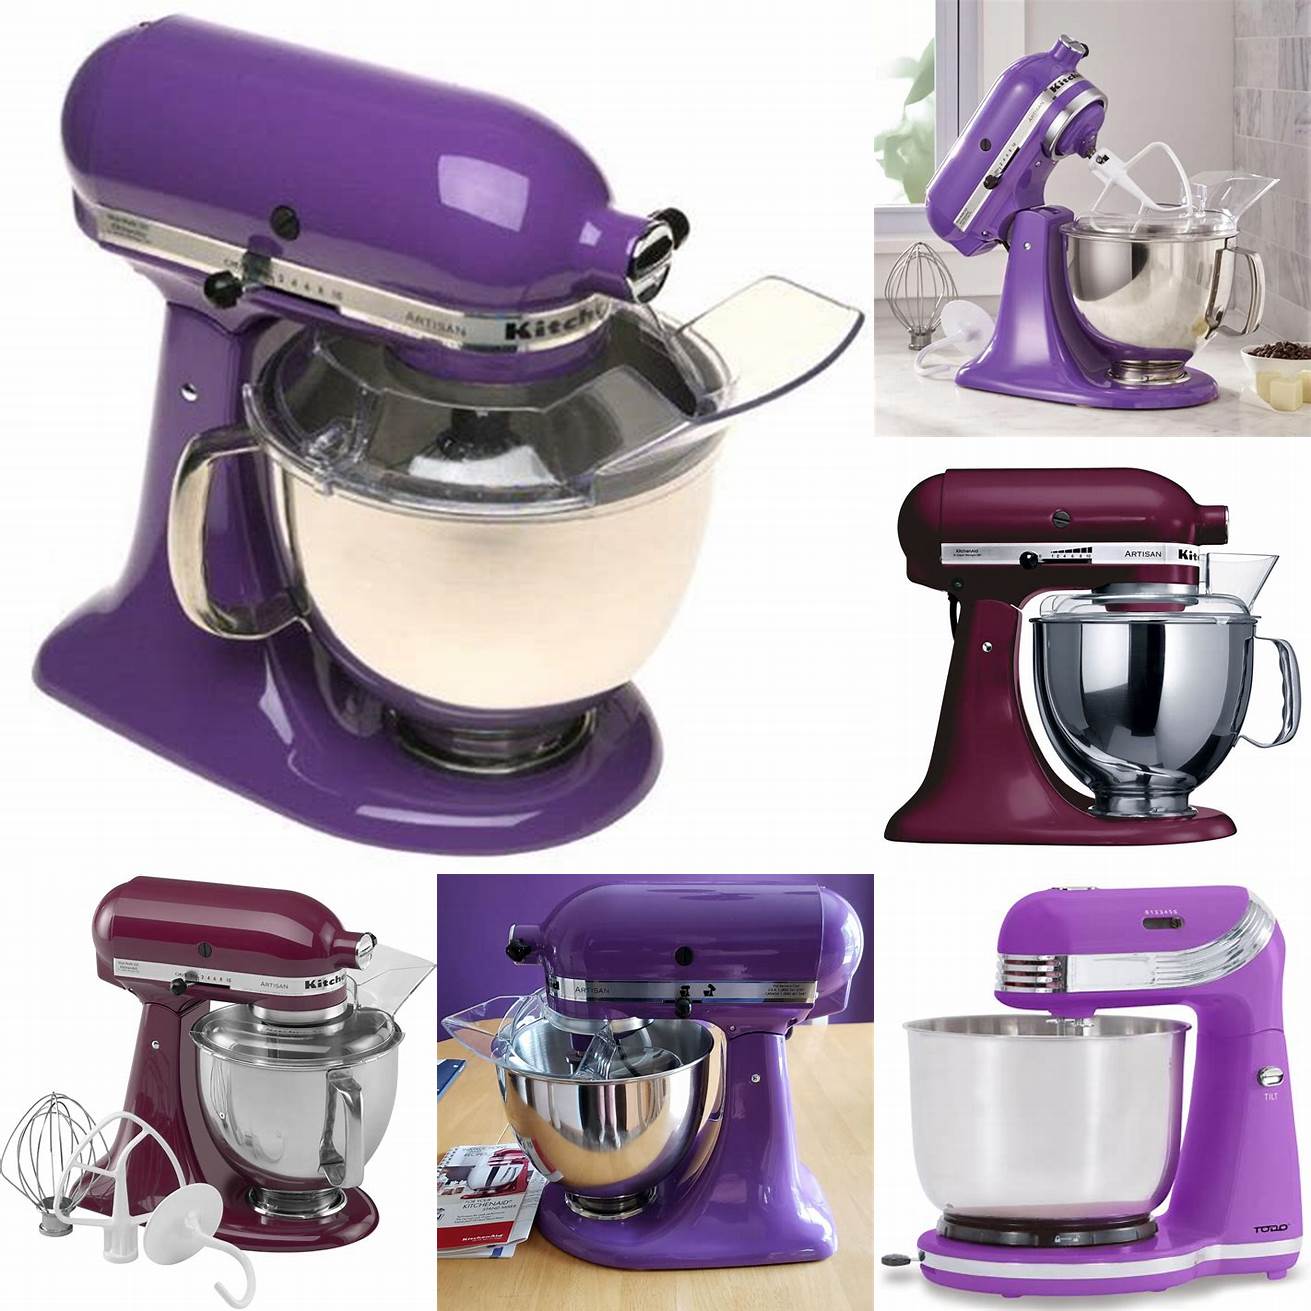 A purple stand mixer